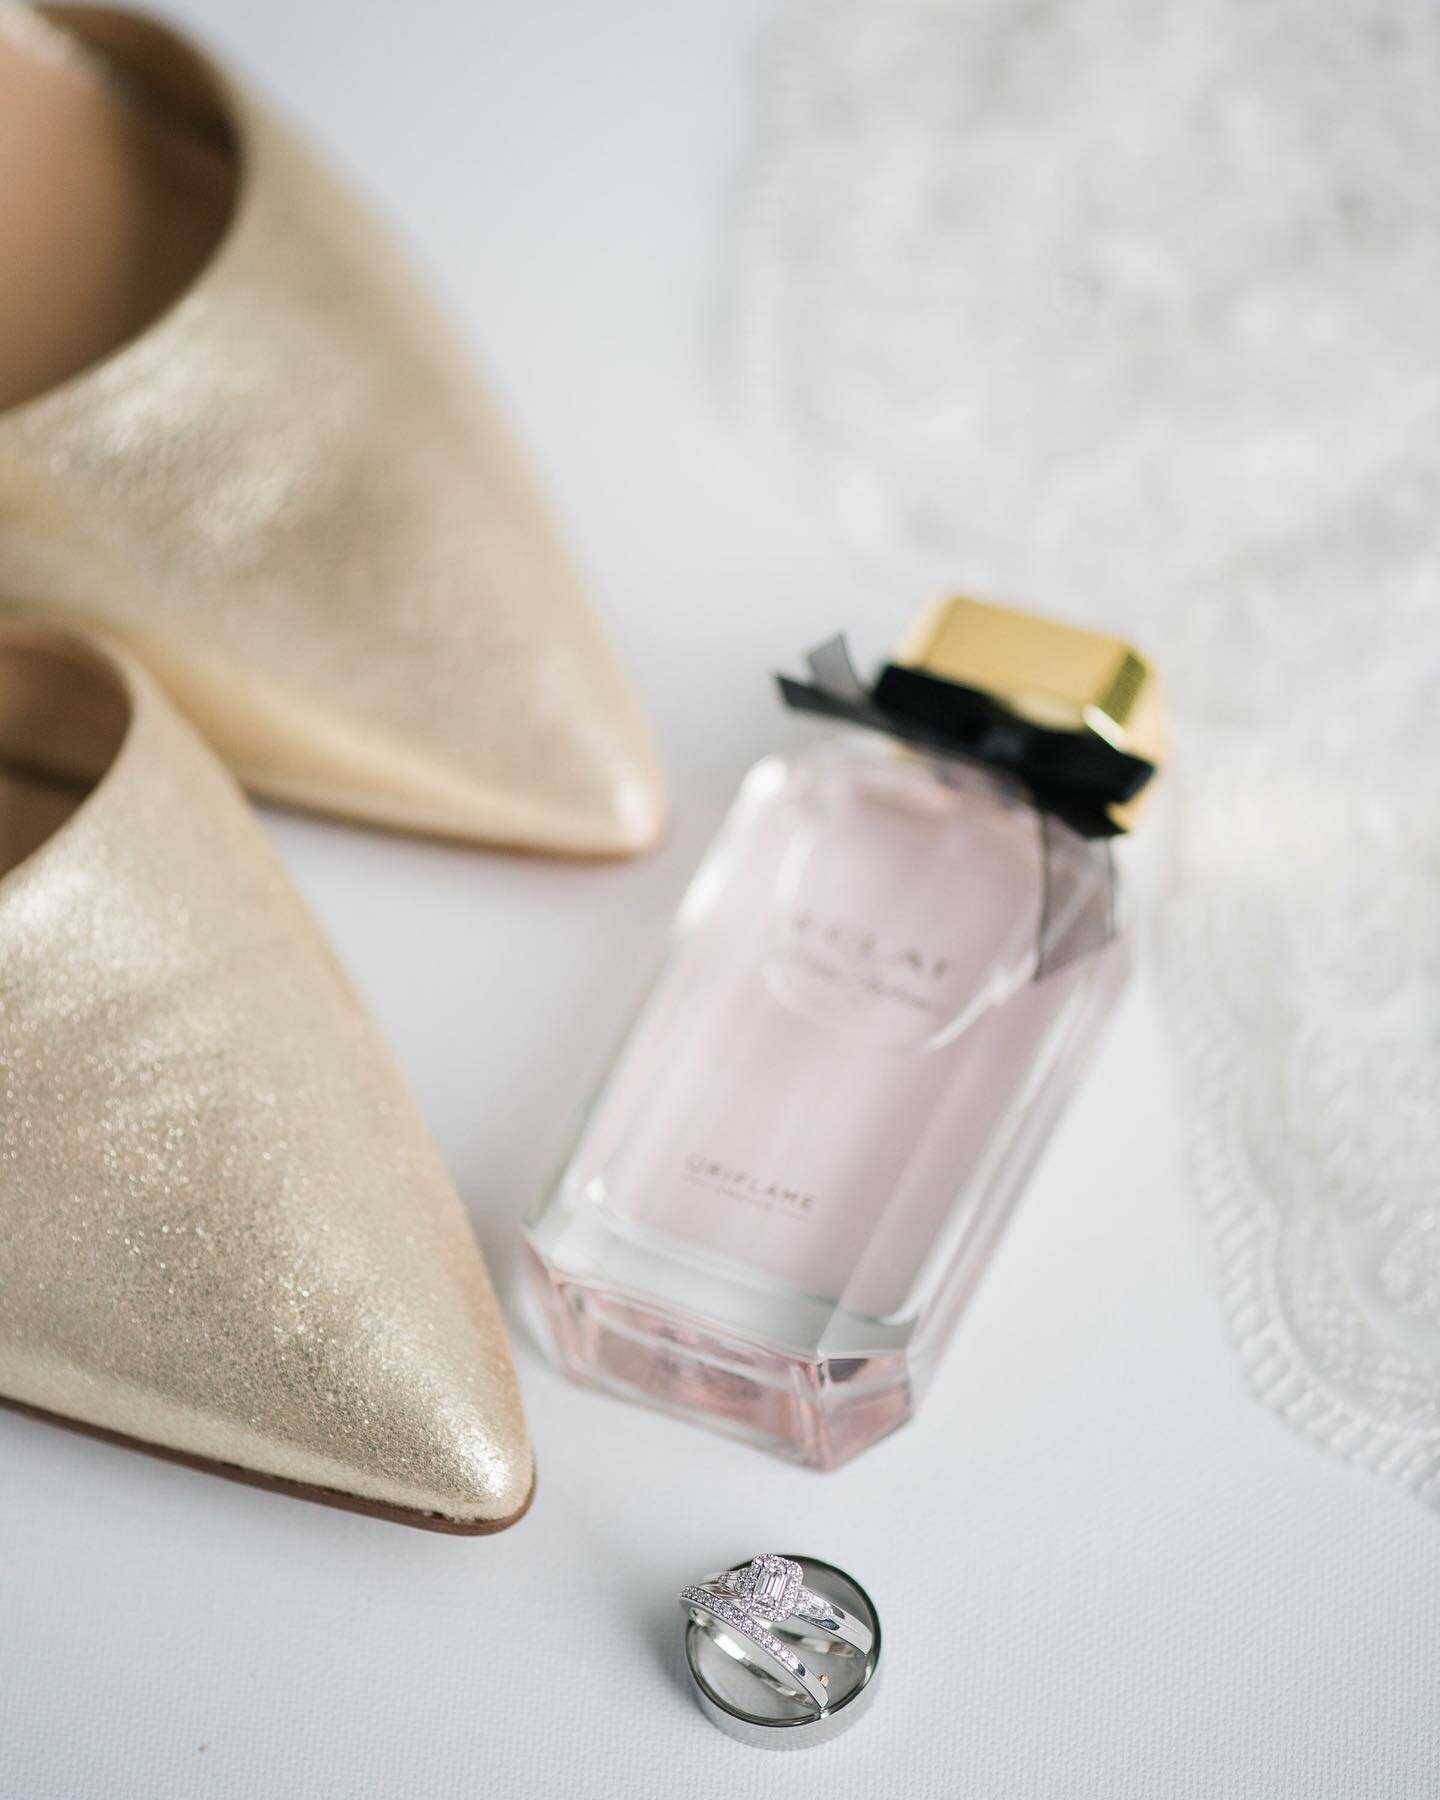 Over the last few years, I&rsquo;ve become a lot more sensitive (or should I say &ldquo;scentsitive&rdquo; 😅) but I still love the look of beautiful perfume bottle styled from a wedding morning. I love seeing these style of photos, showcasing the st